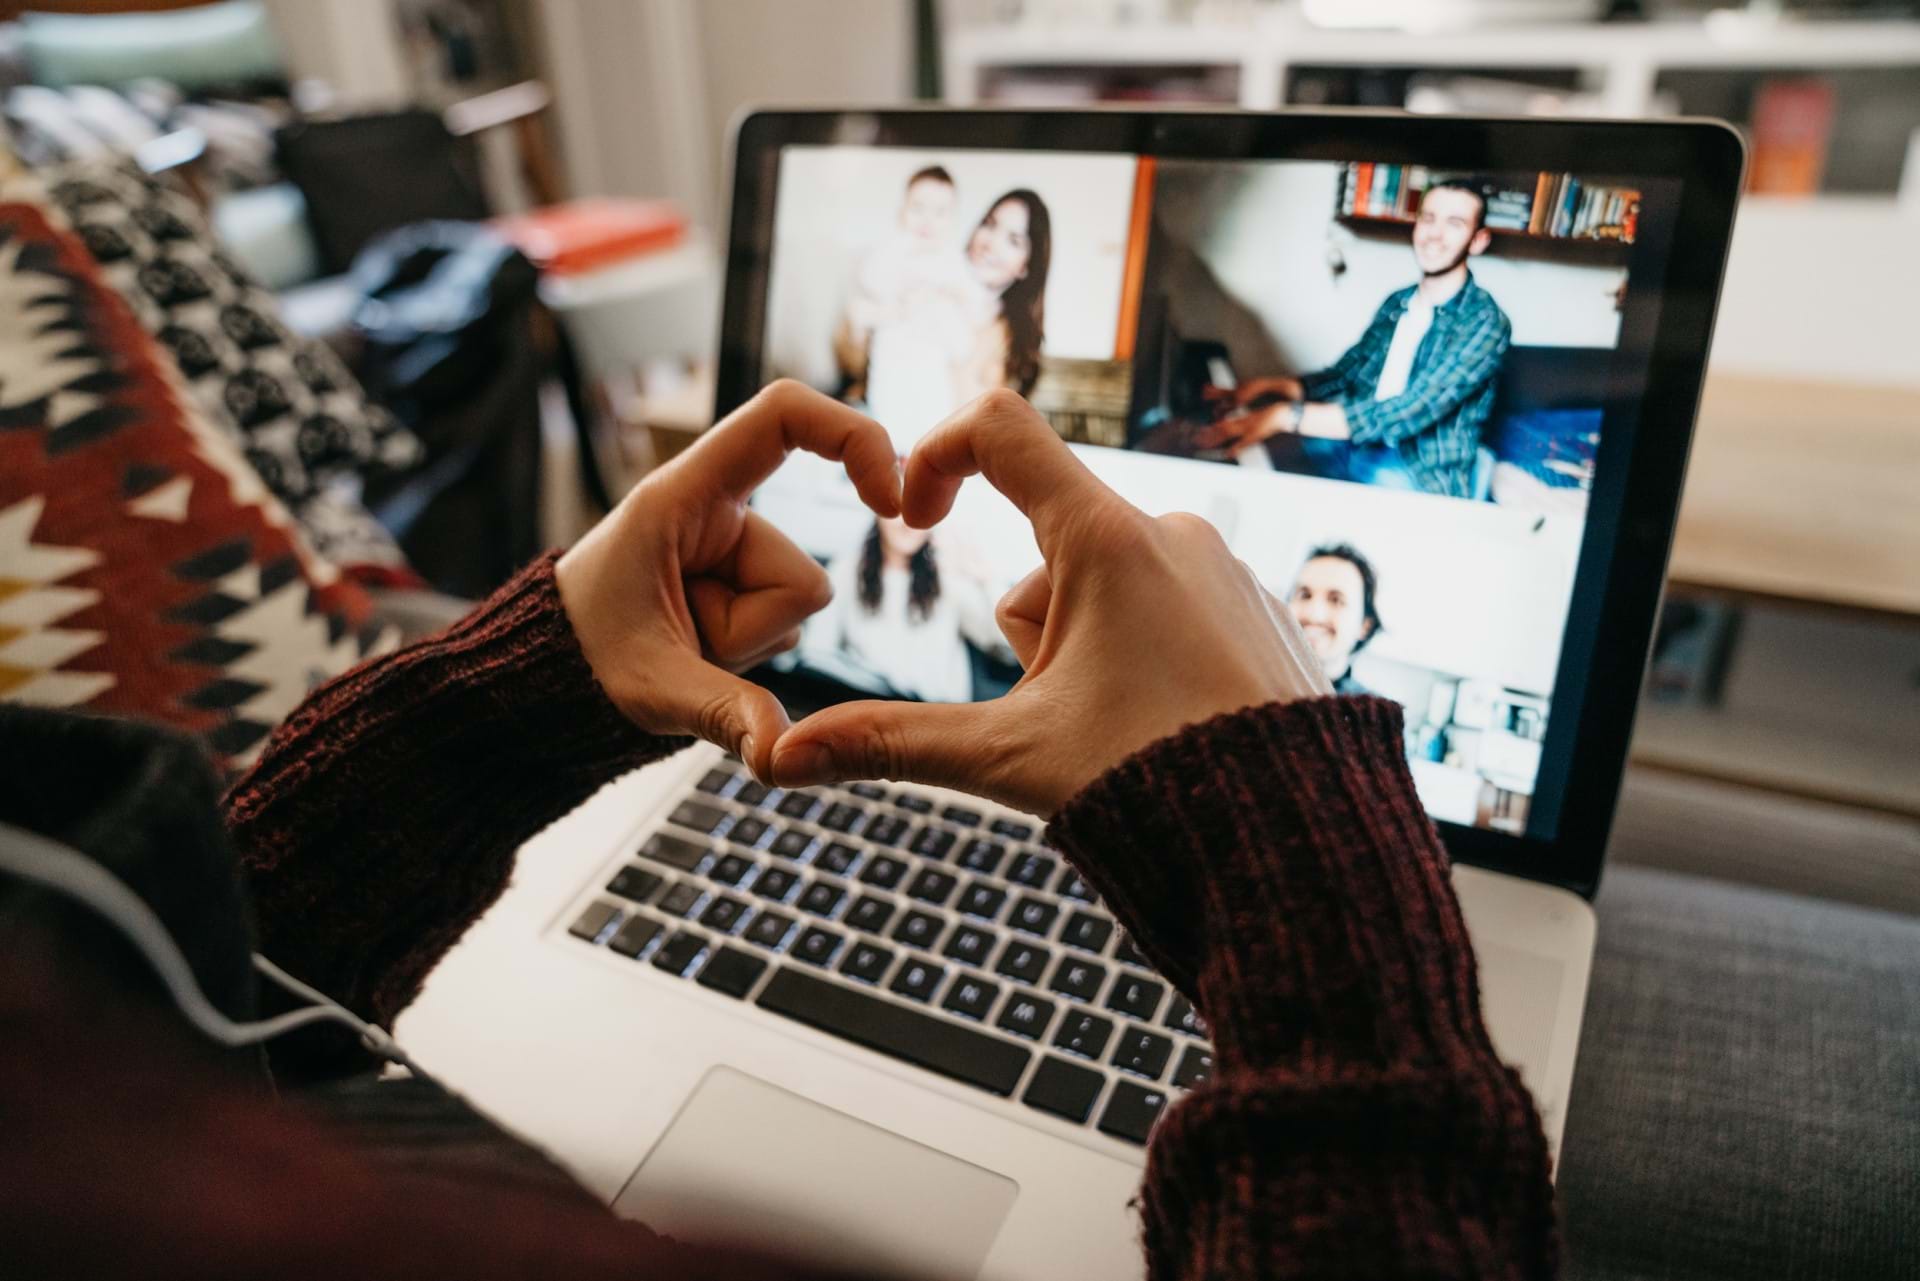 A photo of hands making a heart symbol in front of a laptop